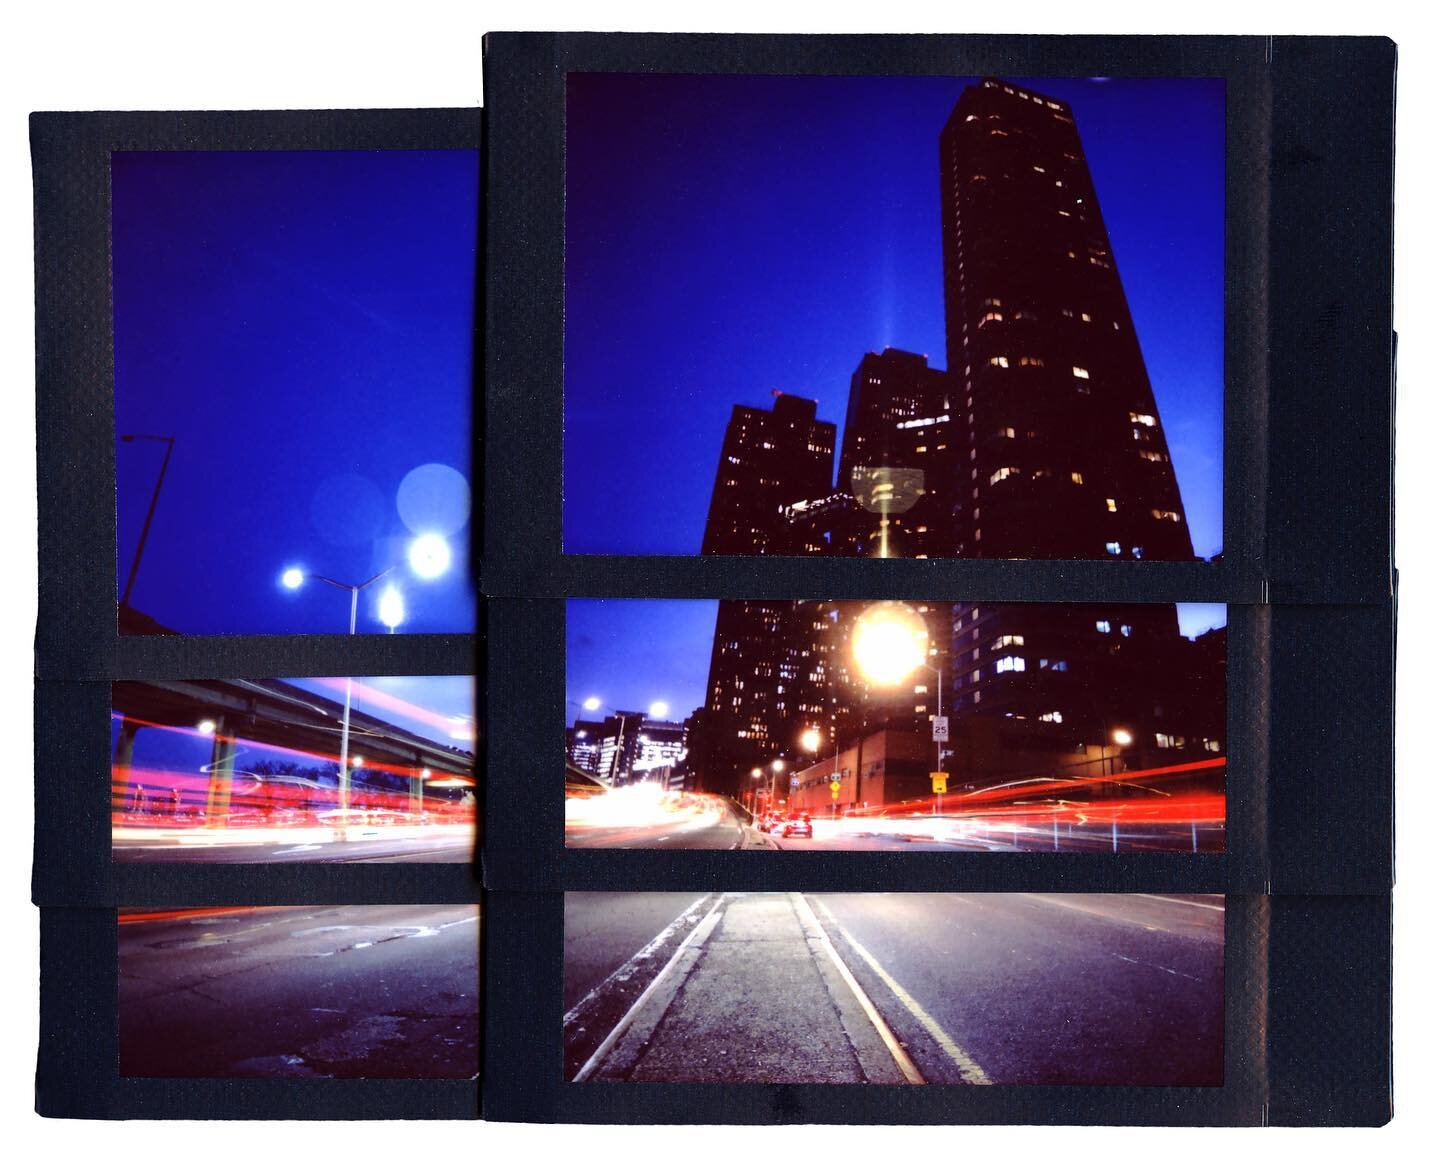 Long exposure on the FDR, instant film collage

Shot on instax film with a mini 90 on a tripod. People look at you a little funny when you&rsquo;re setting up your tripod in the middle of the FDR. But hey, this is New York City, everybody&rsquo;s a l